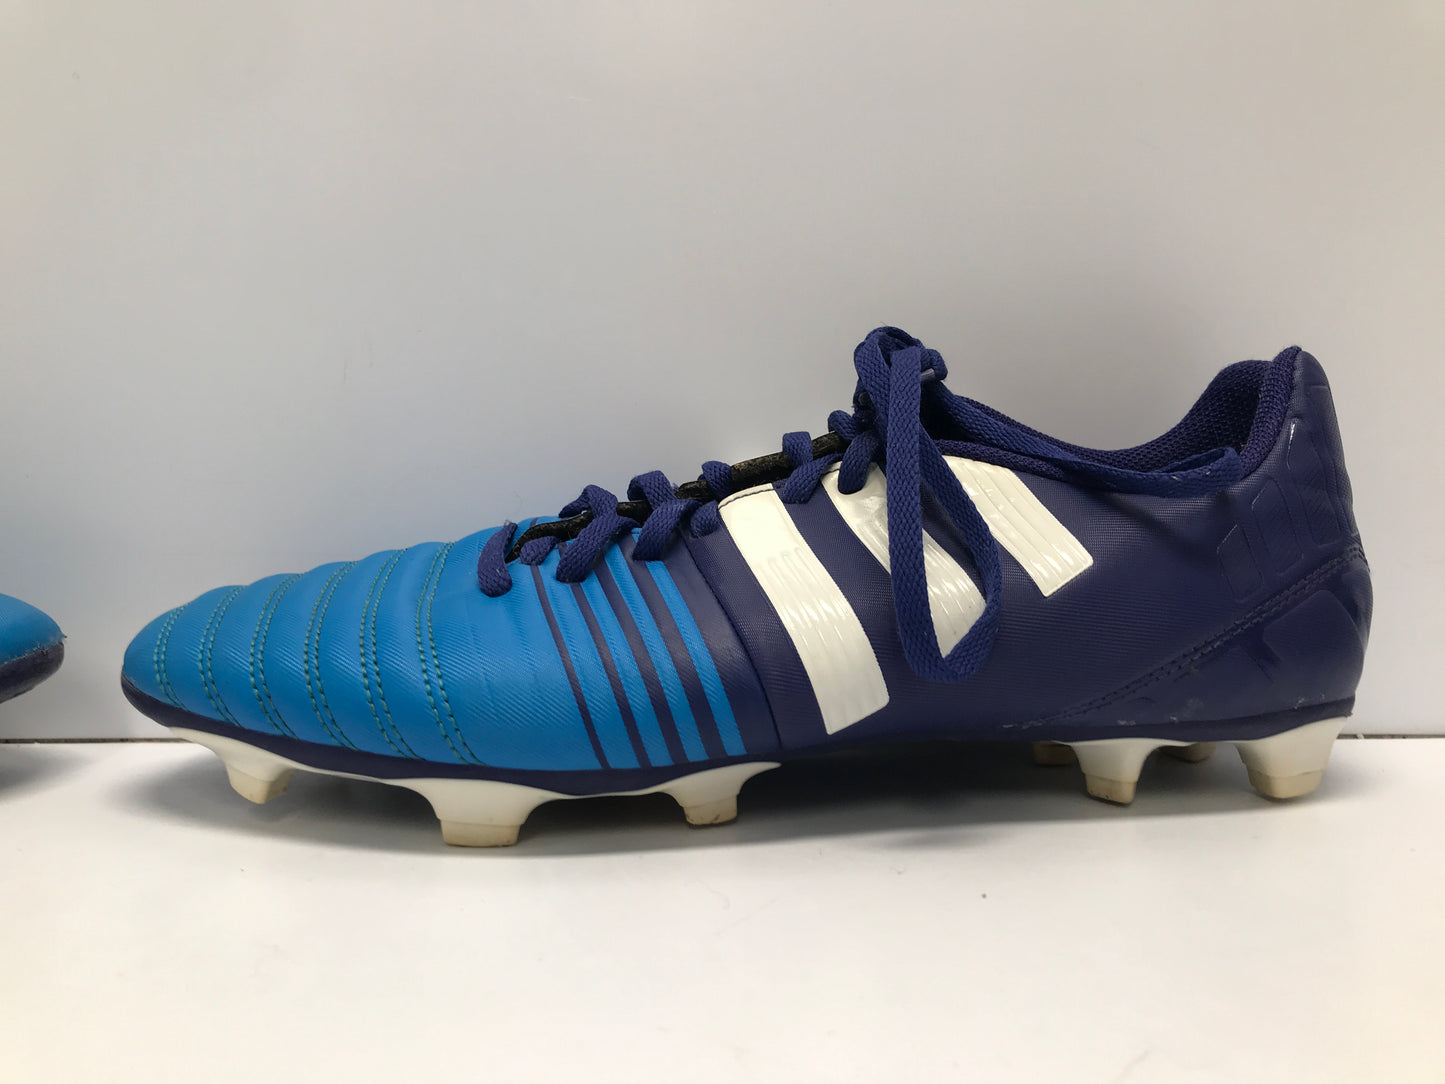 Soccer Shoes Cleats Men's Size 11 Adidas Nitocharge Blue Excellent